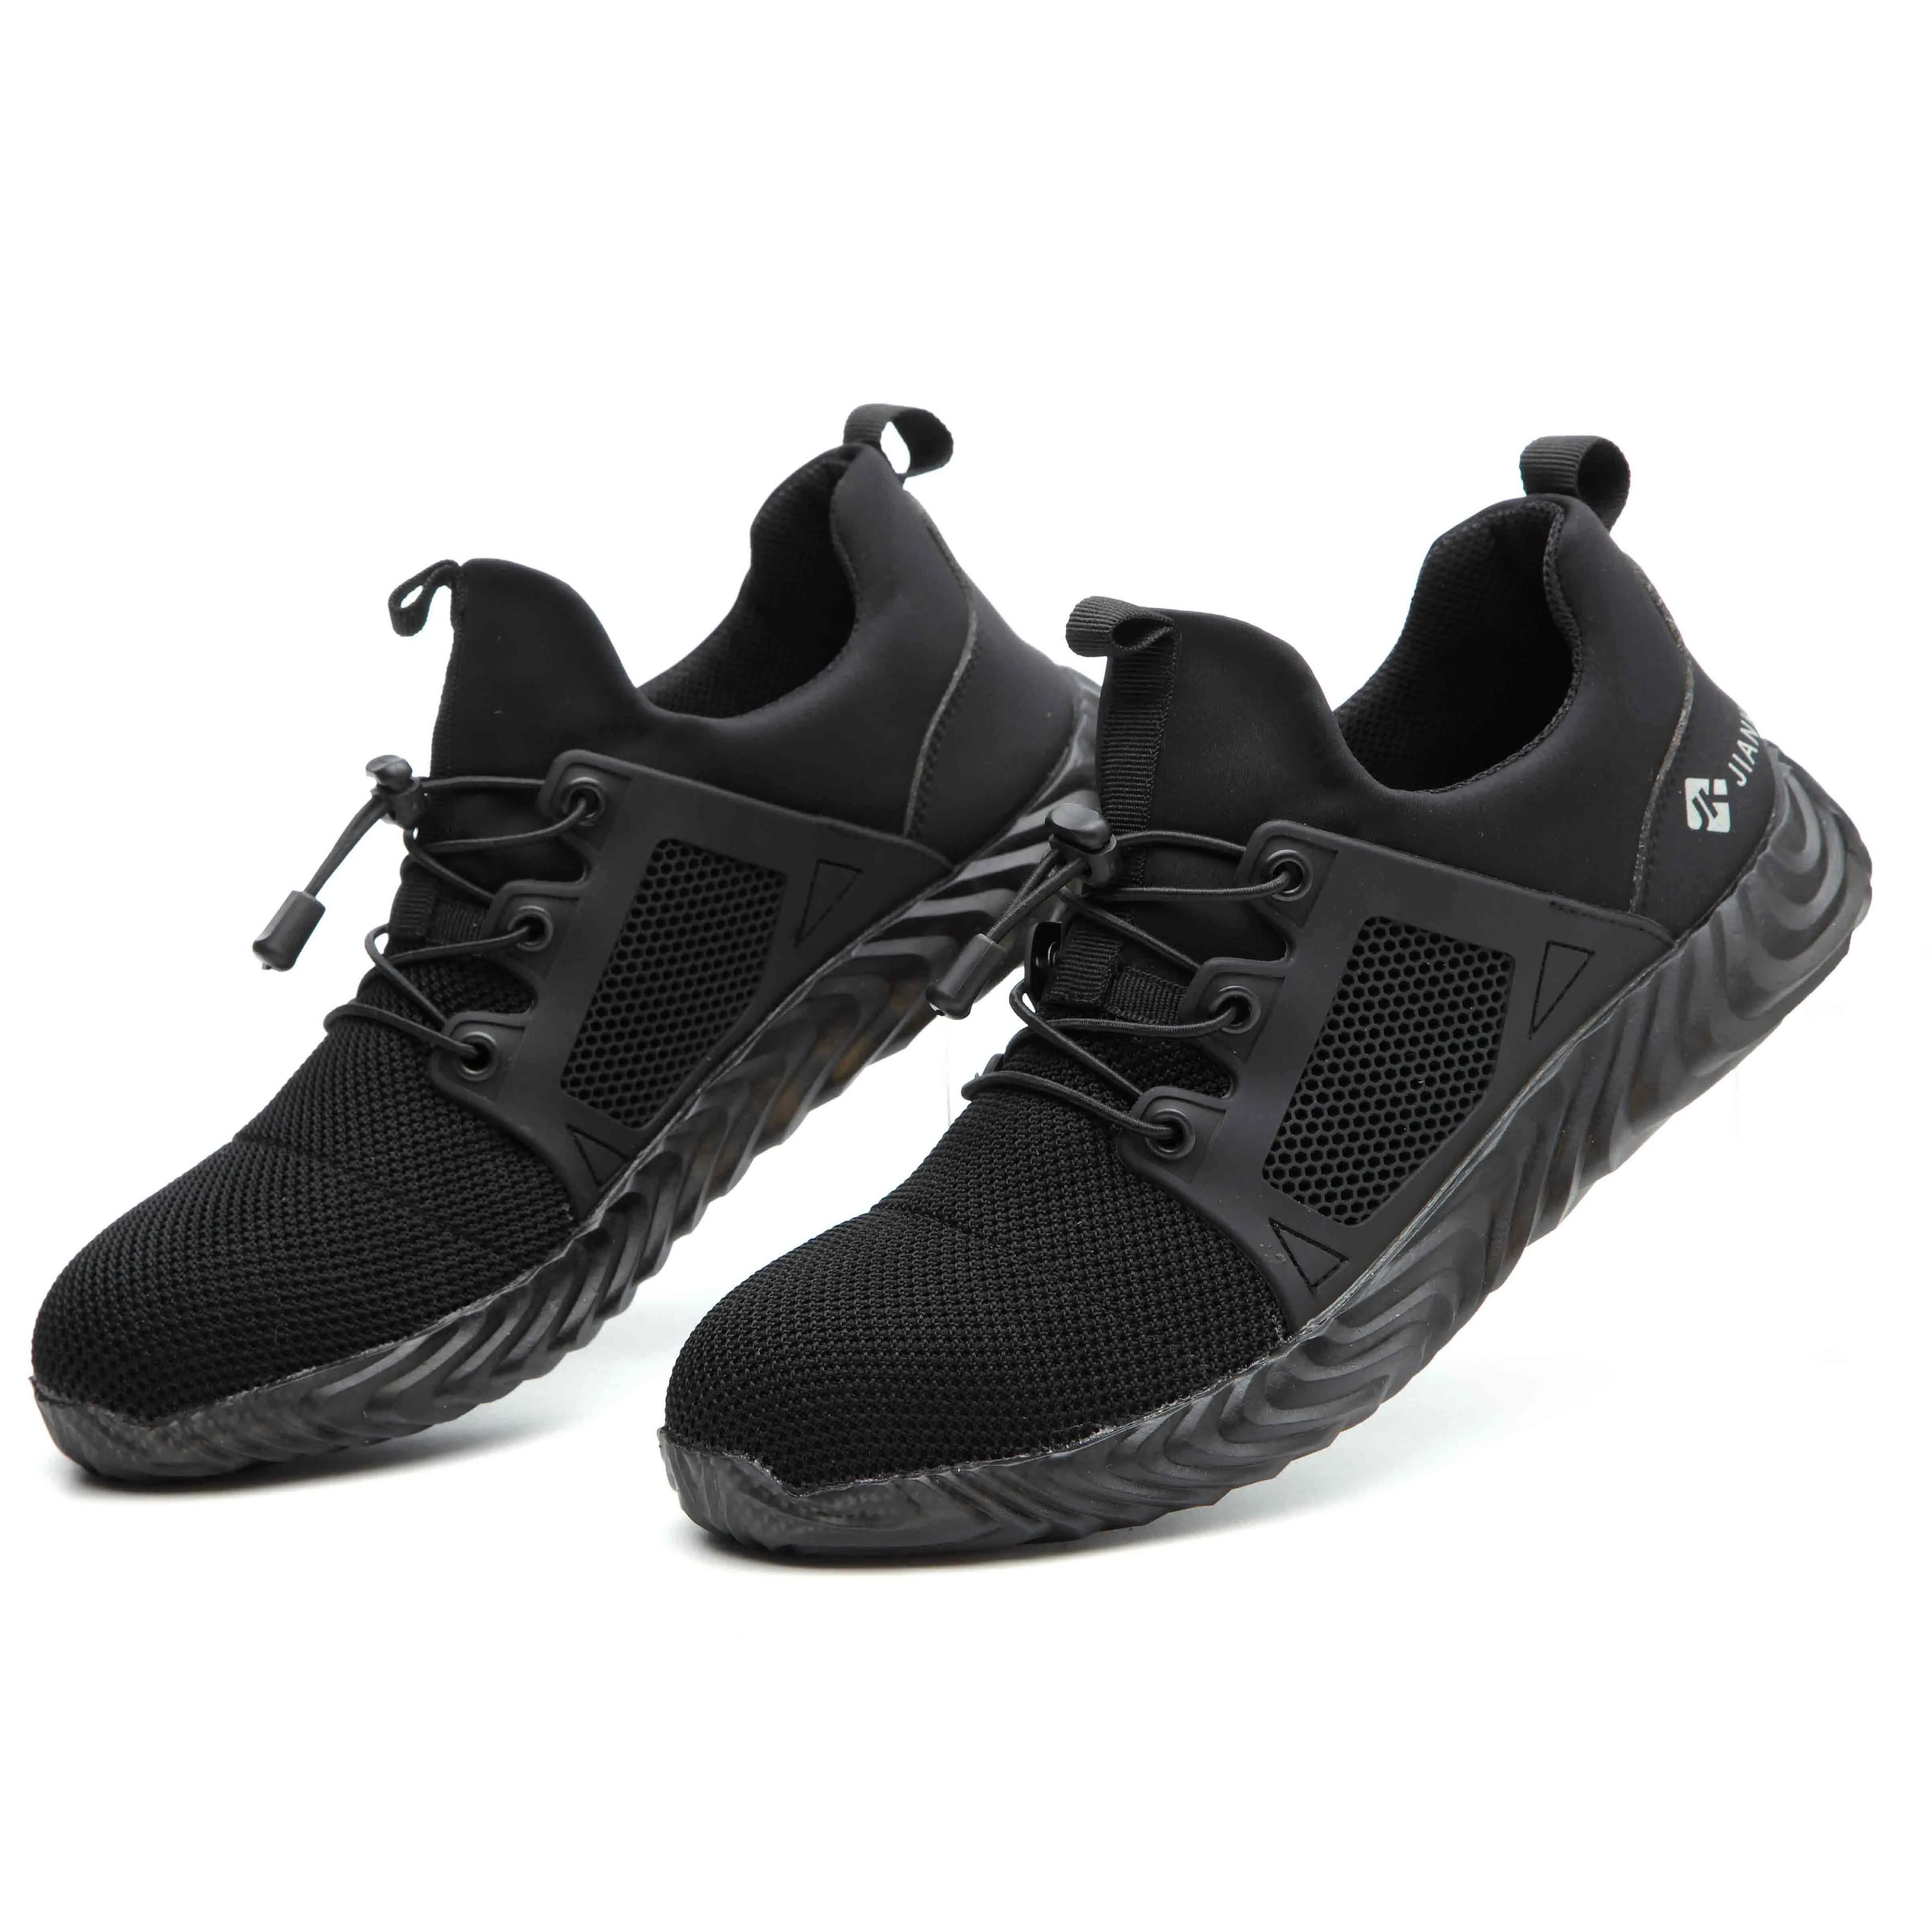 Summer Ventilated Men's Sandals Anti Smashing Antistatic Safety Shoes ...